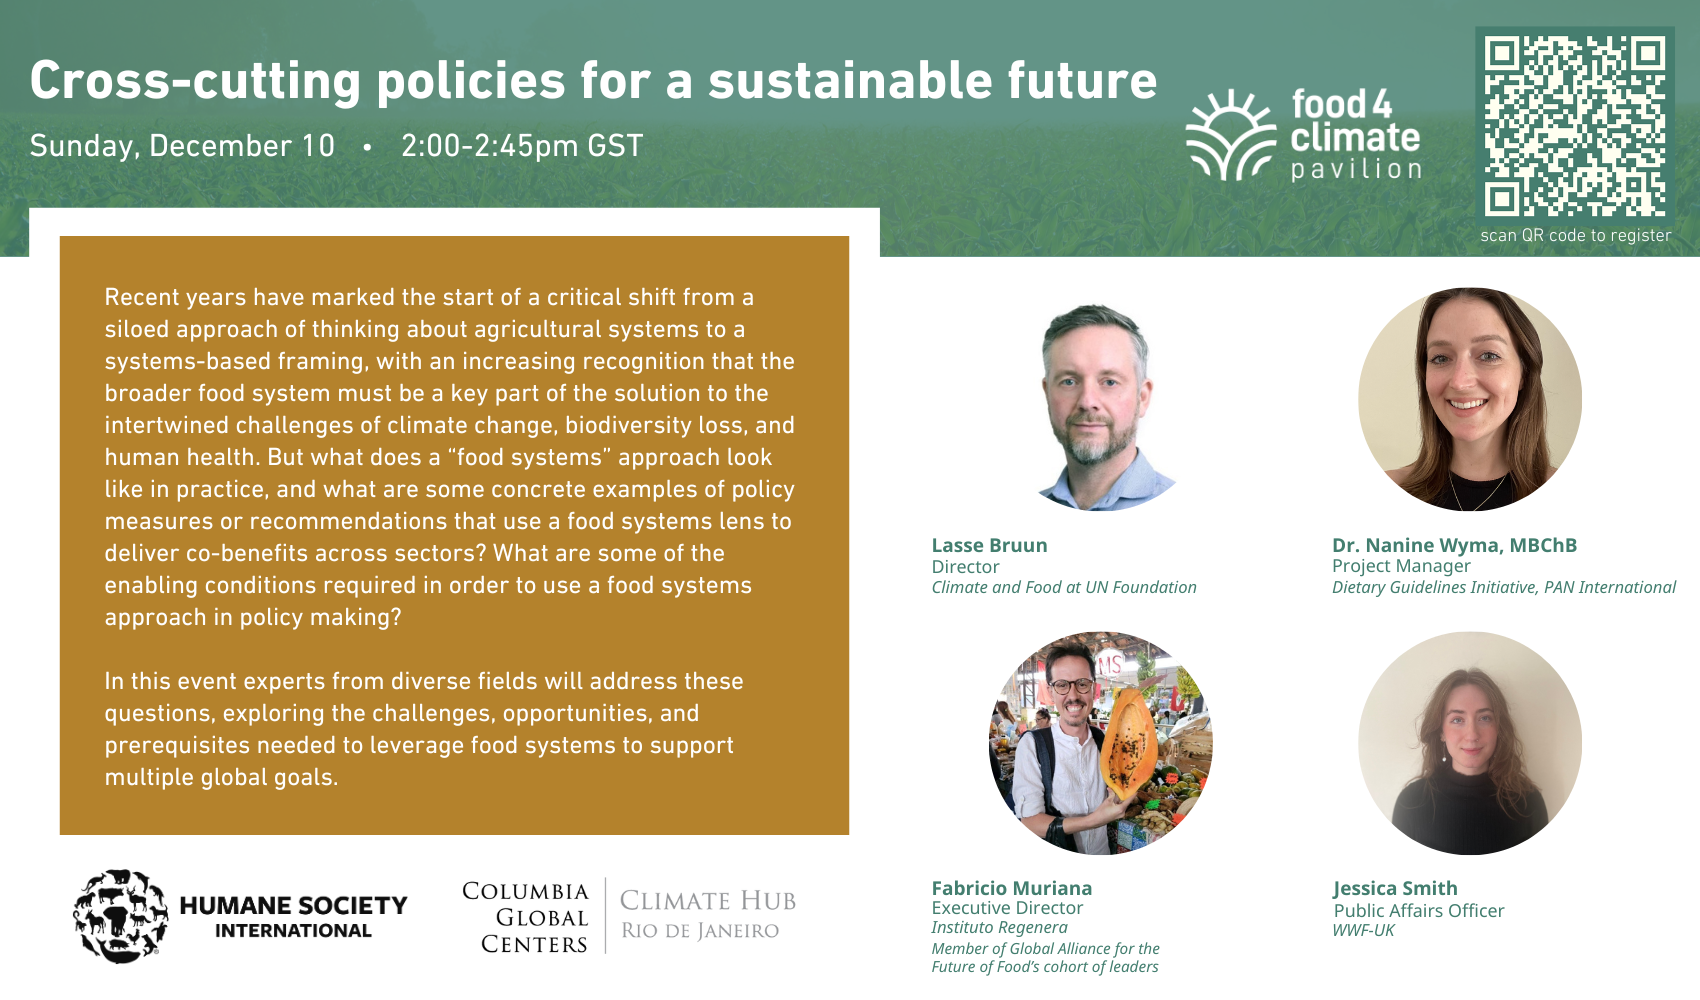 Cross-cutting policies for a sustainable future